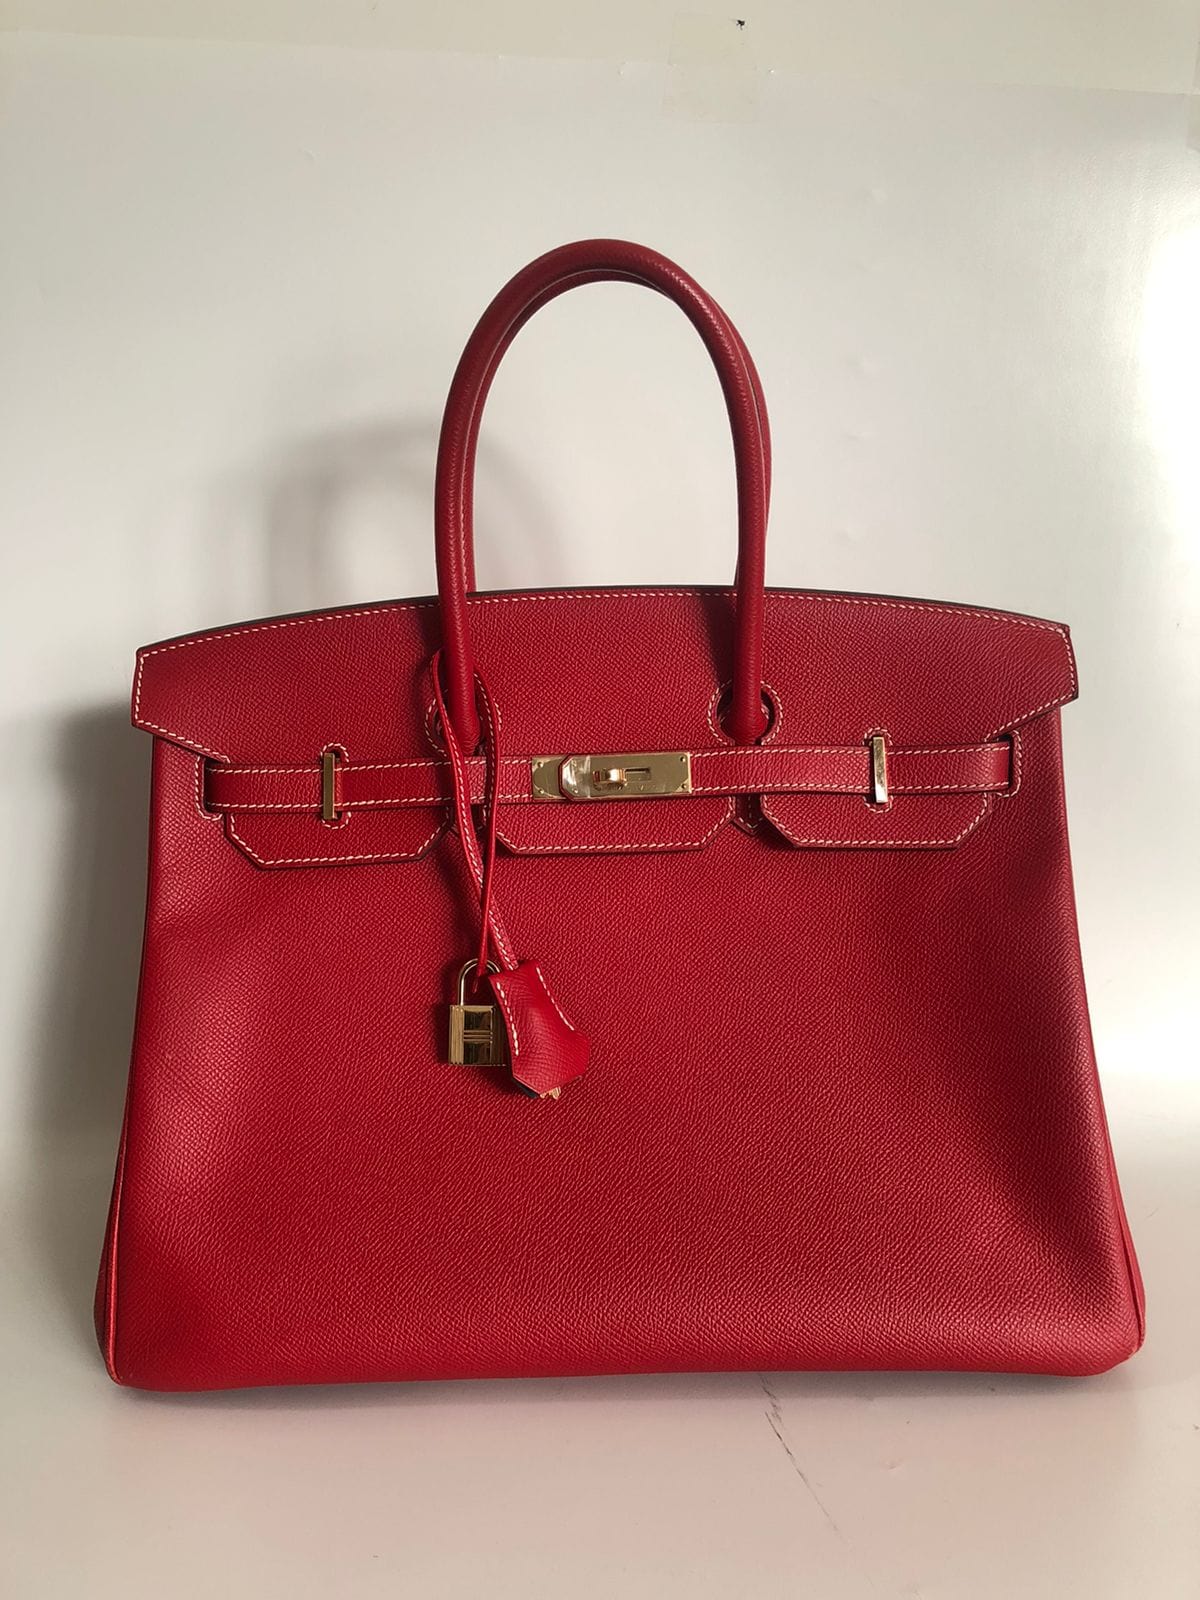 Hermès Hermes Candy Birkin 30 Epsom Thalahsa interior and Rouge Casaque with GHW ASL4434